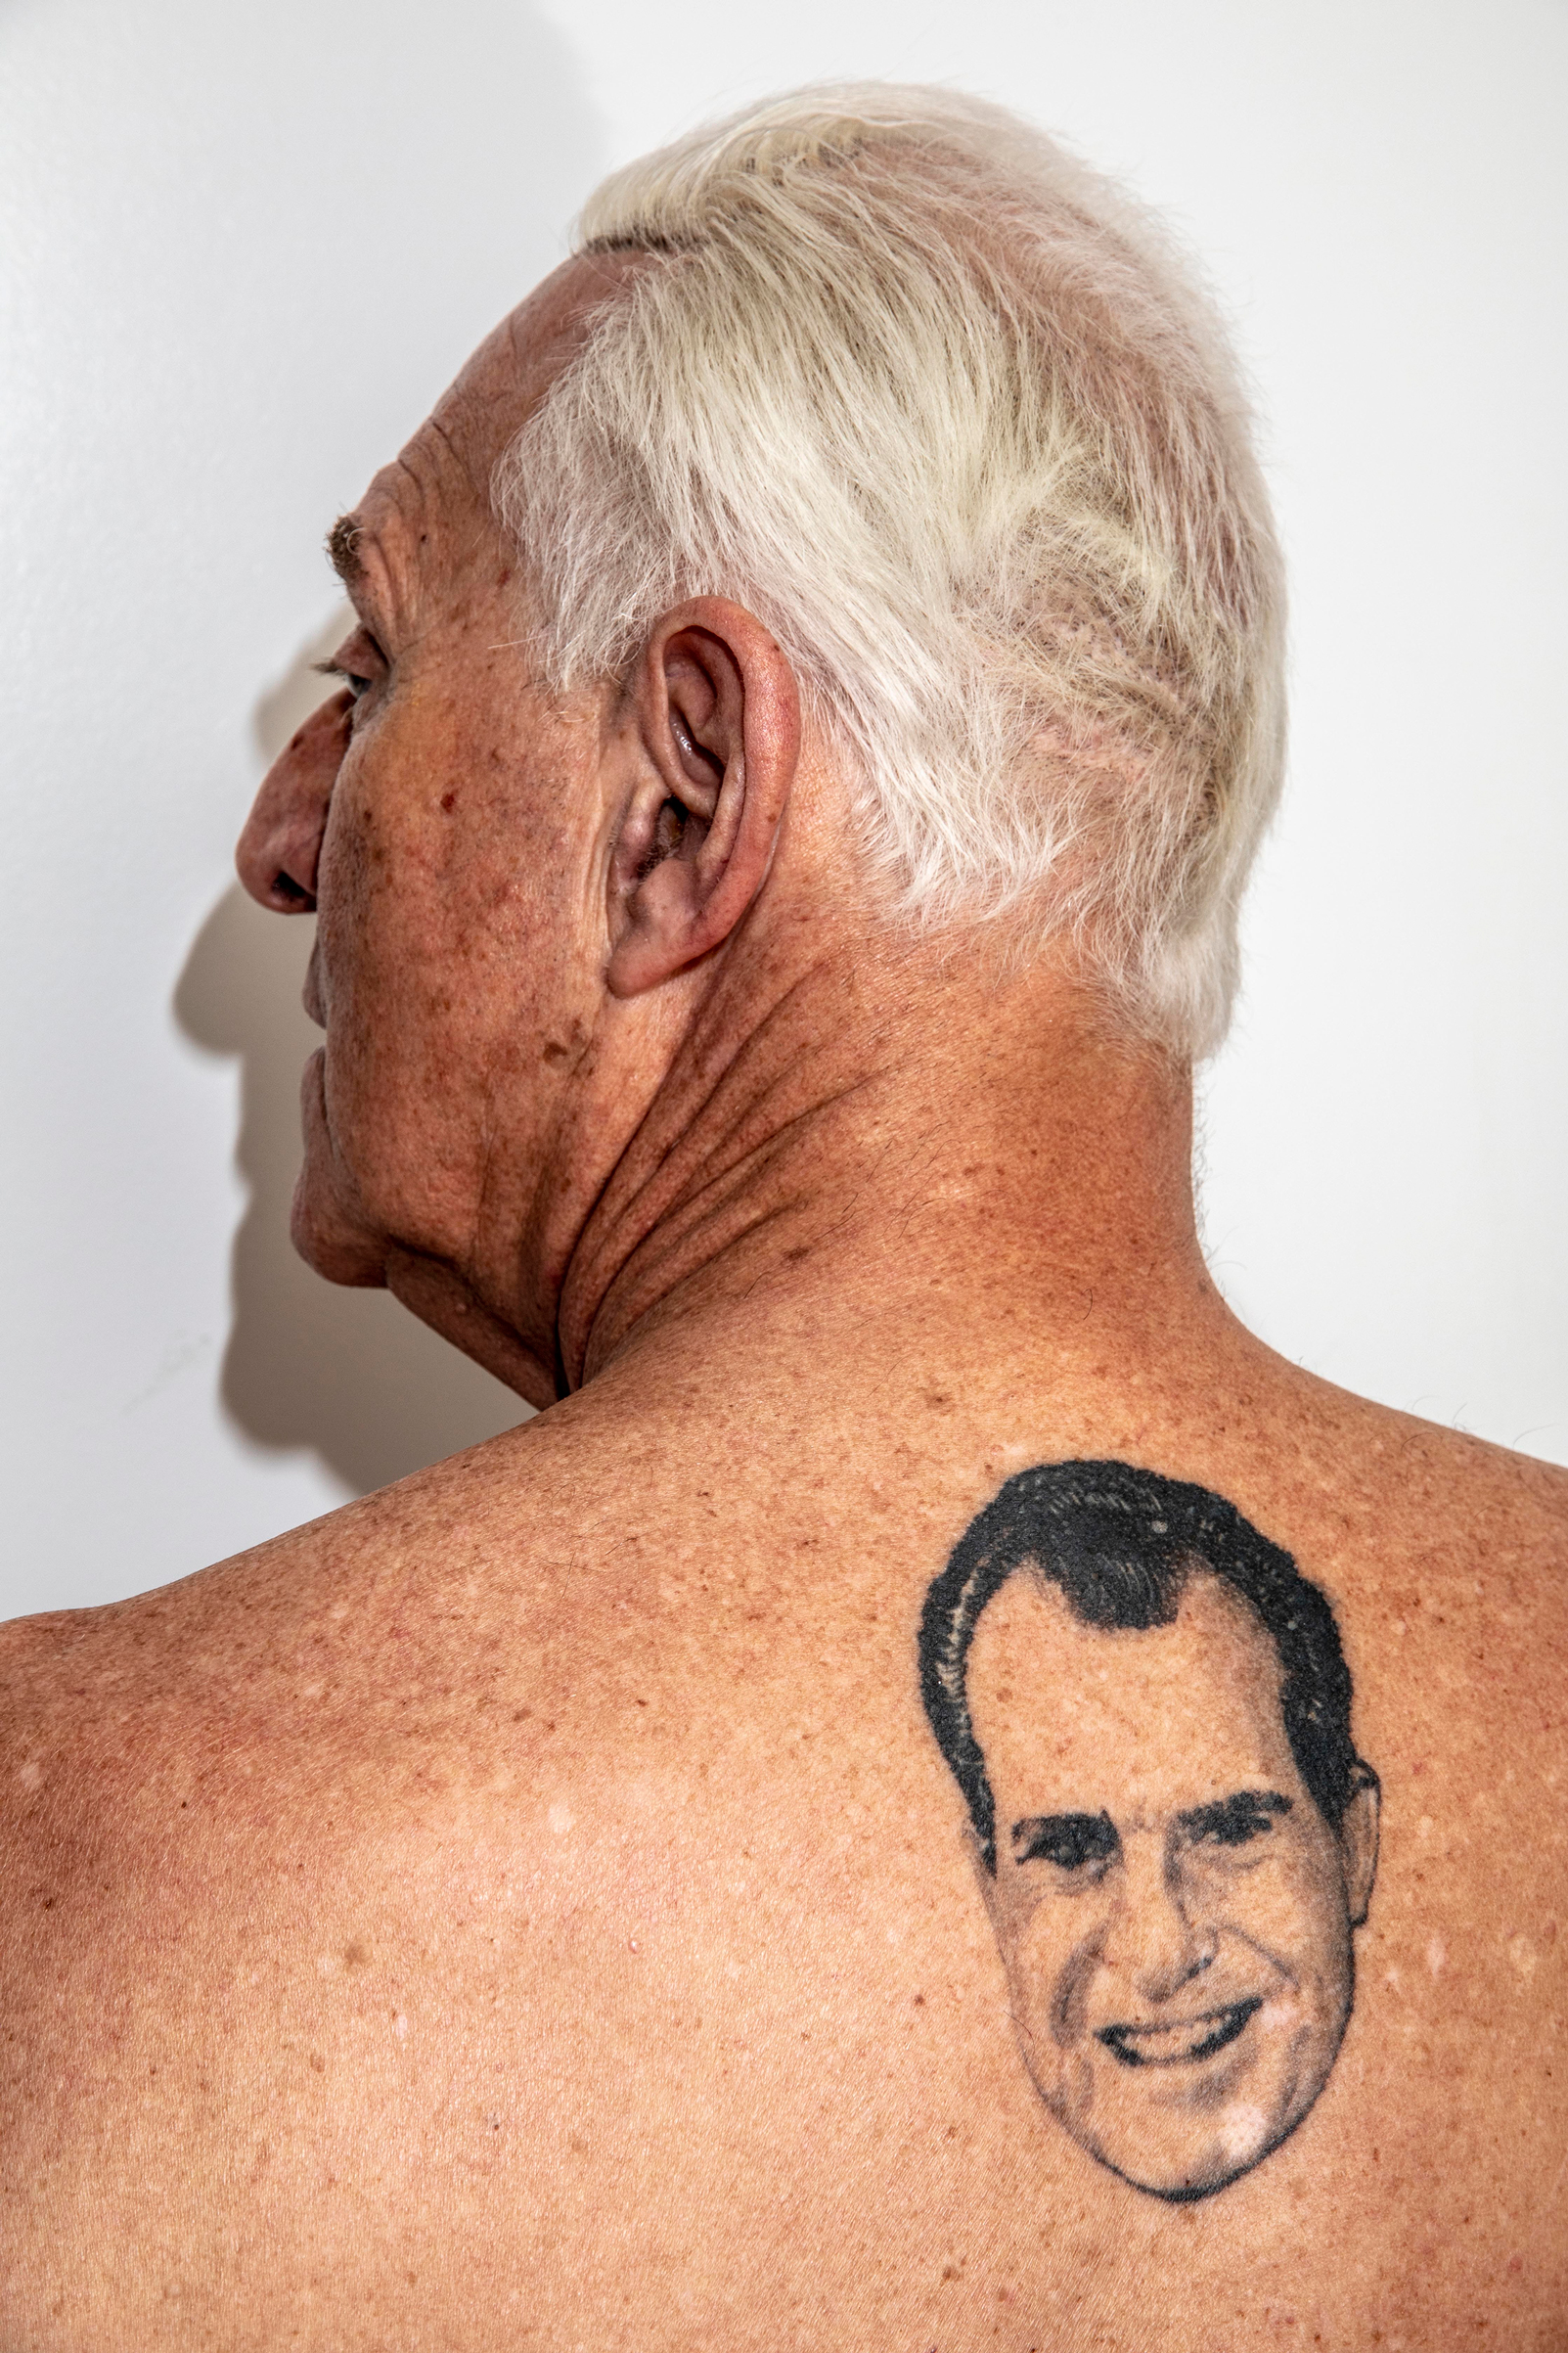 Stone shows off his Richard Nixon tattoo at his apartment i​n New York in June 2018. (Mark Peterson—Redux Pictures)